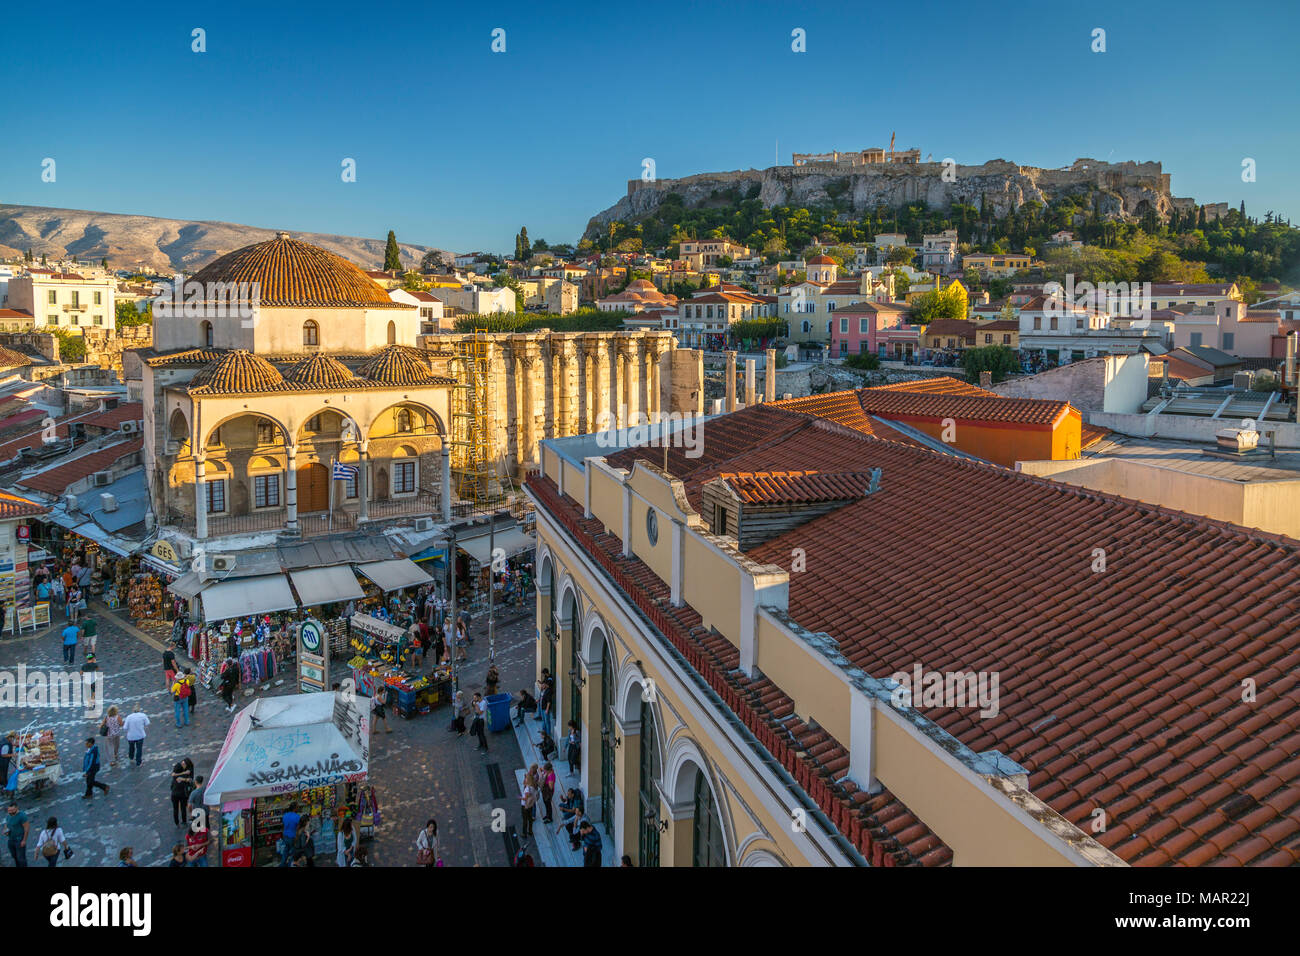 Elevated view of Monastiraki Square with The Acropolis visible in background during late afternoon, Monastiraki District, Athens, Greece, Europe Stock Photo